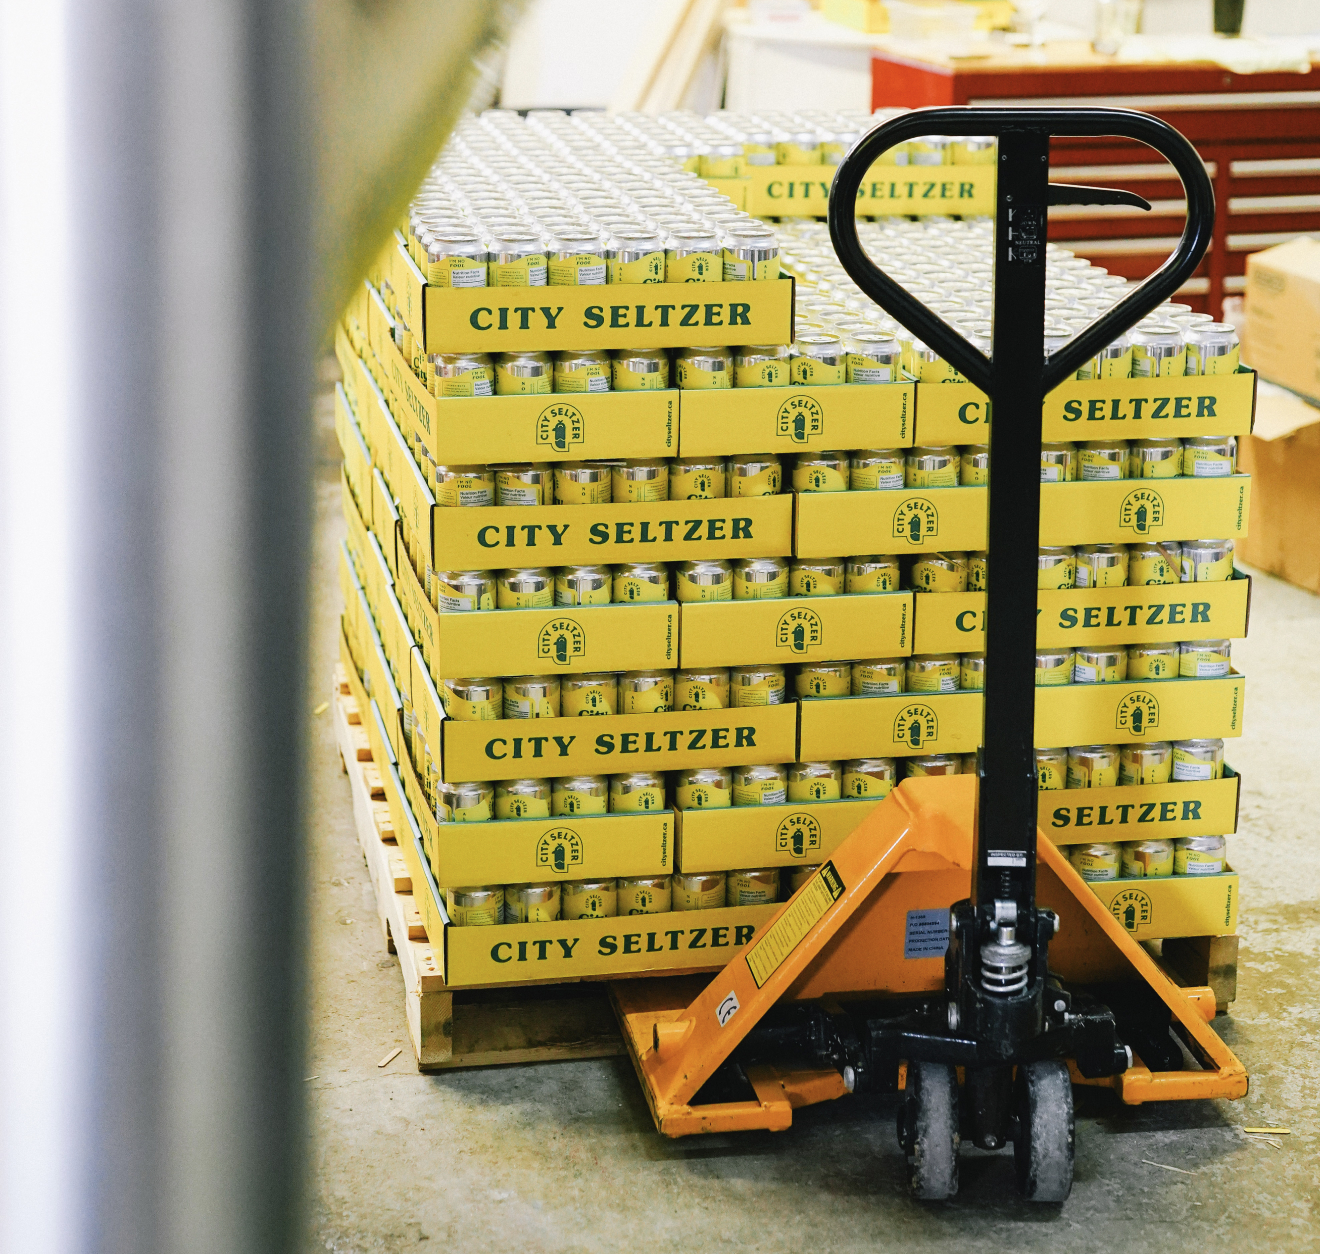 A full palette of lemon-yellow City Seltzer Citrus cases, ready to roll out the door.